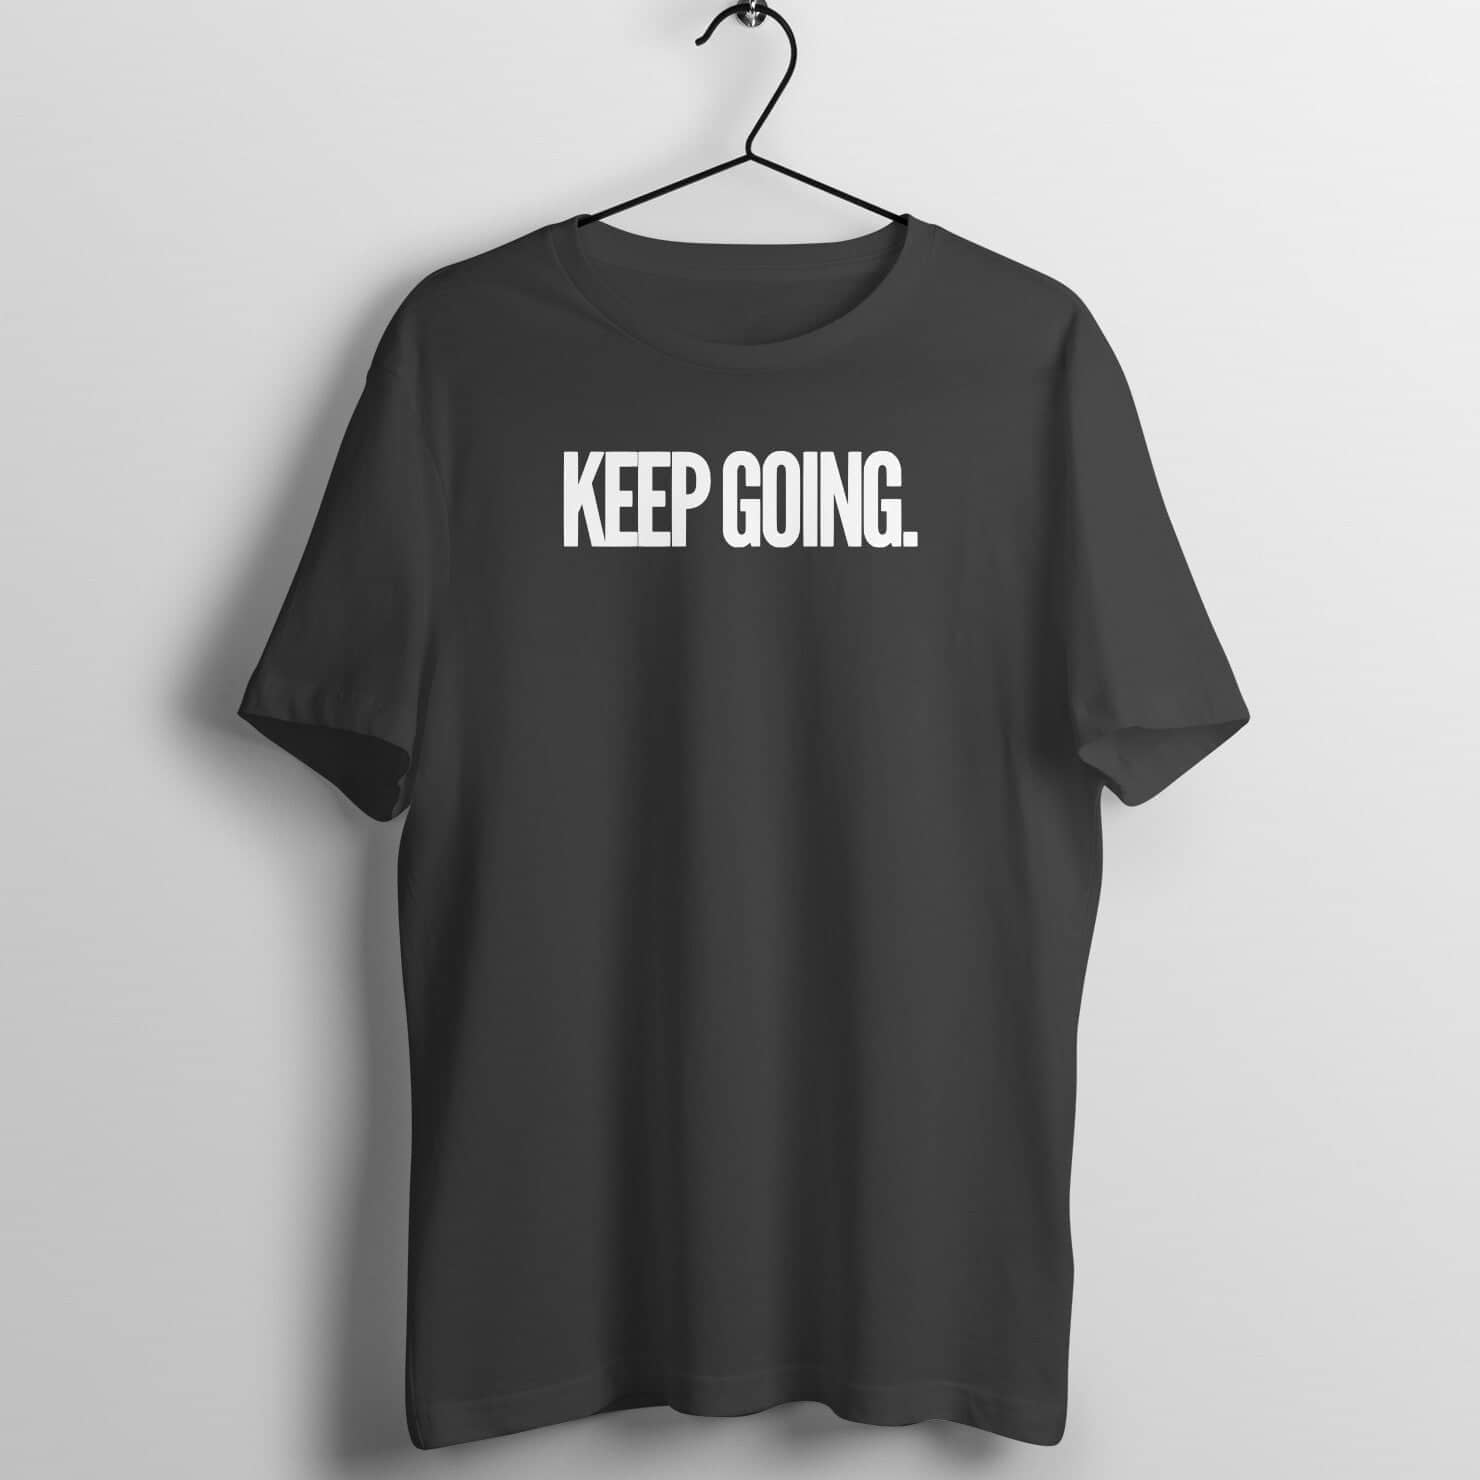 Keep Going Exclusive Black T Shirt for Men and Women Printrove Black S 